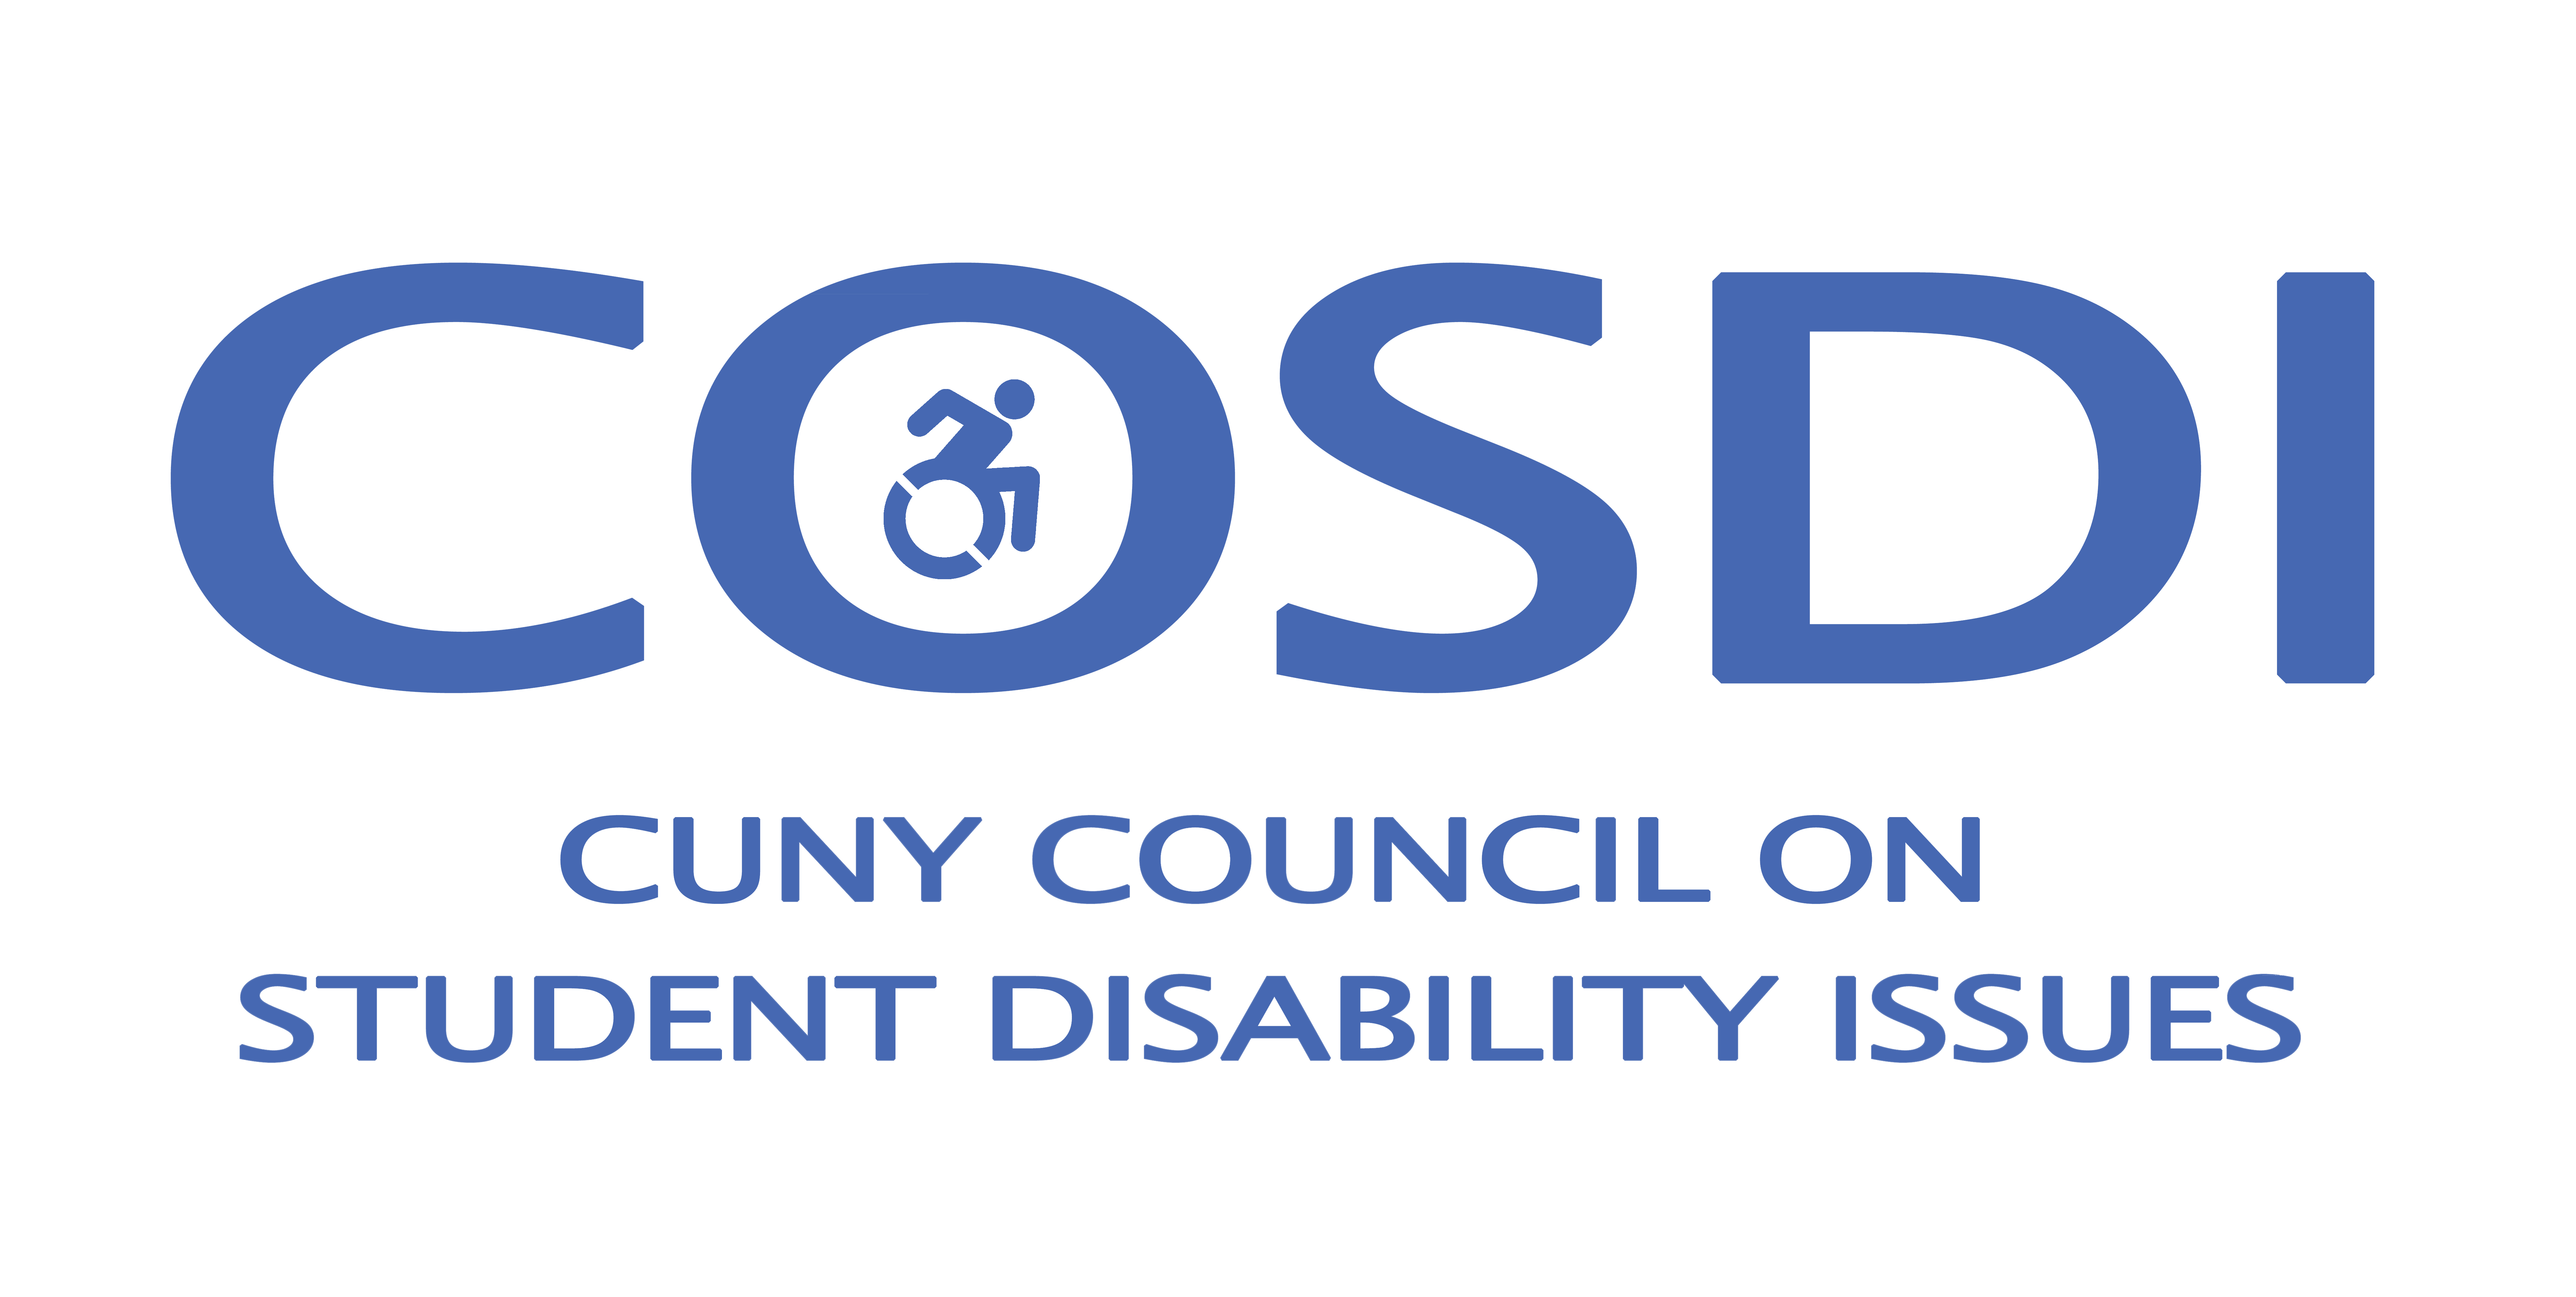 CUNY Council on Student Disability Issues logo